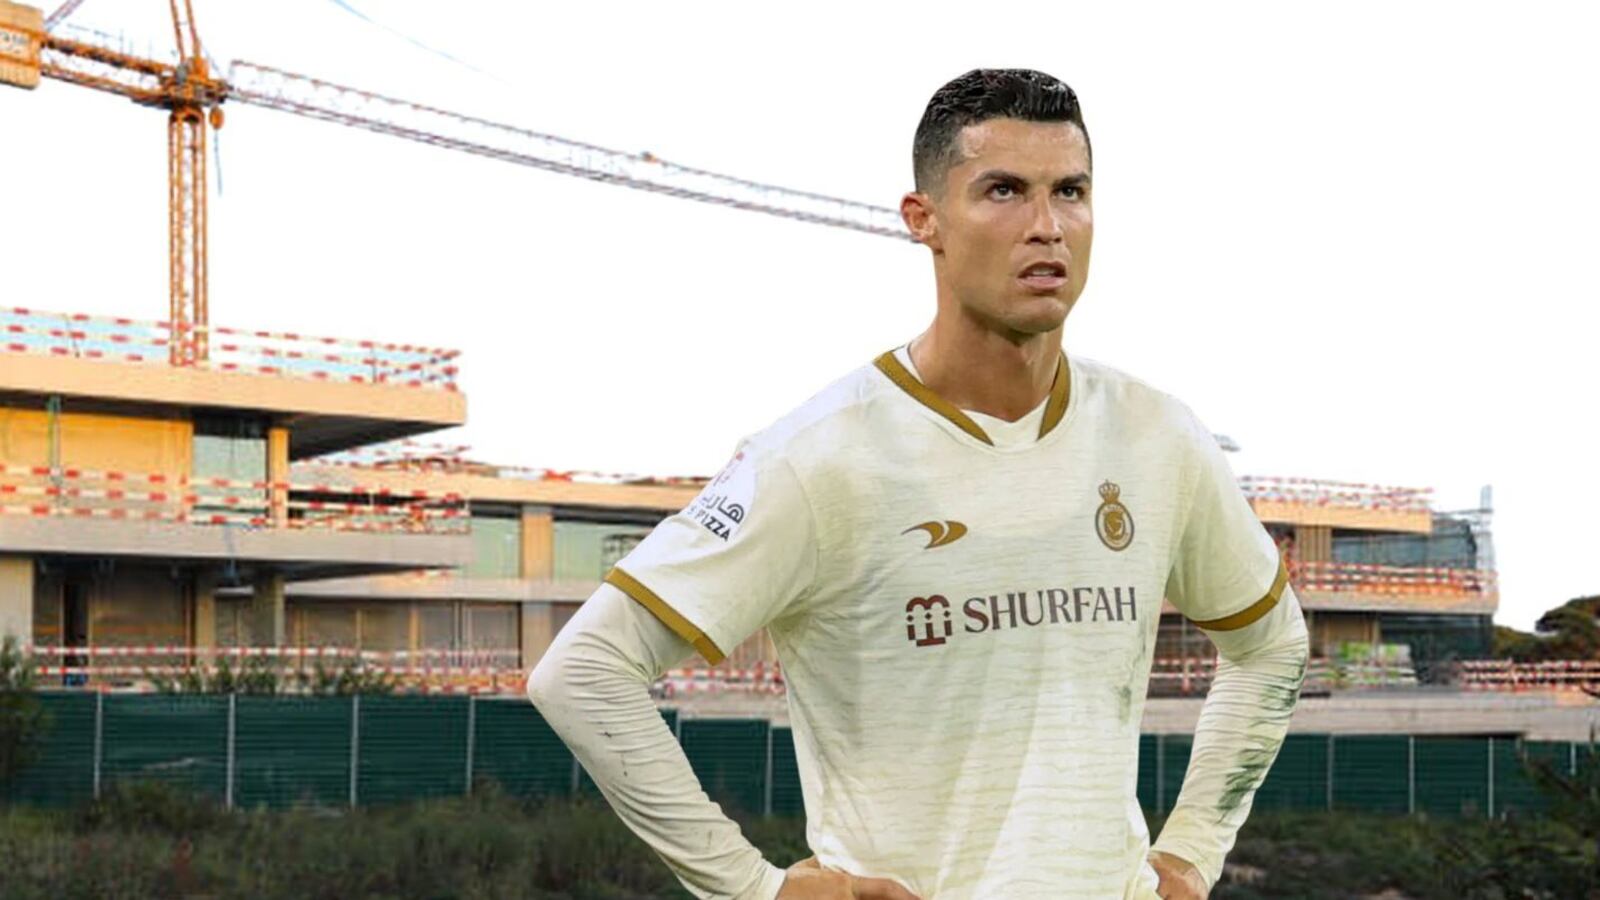 You won't believe what Cristiano Ronaldo's neighbors in Portugal think about him